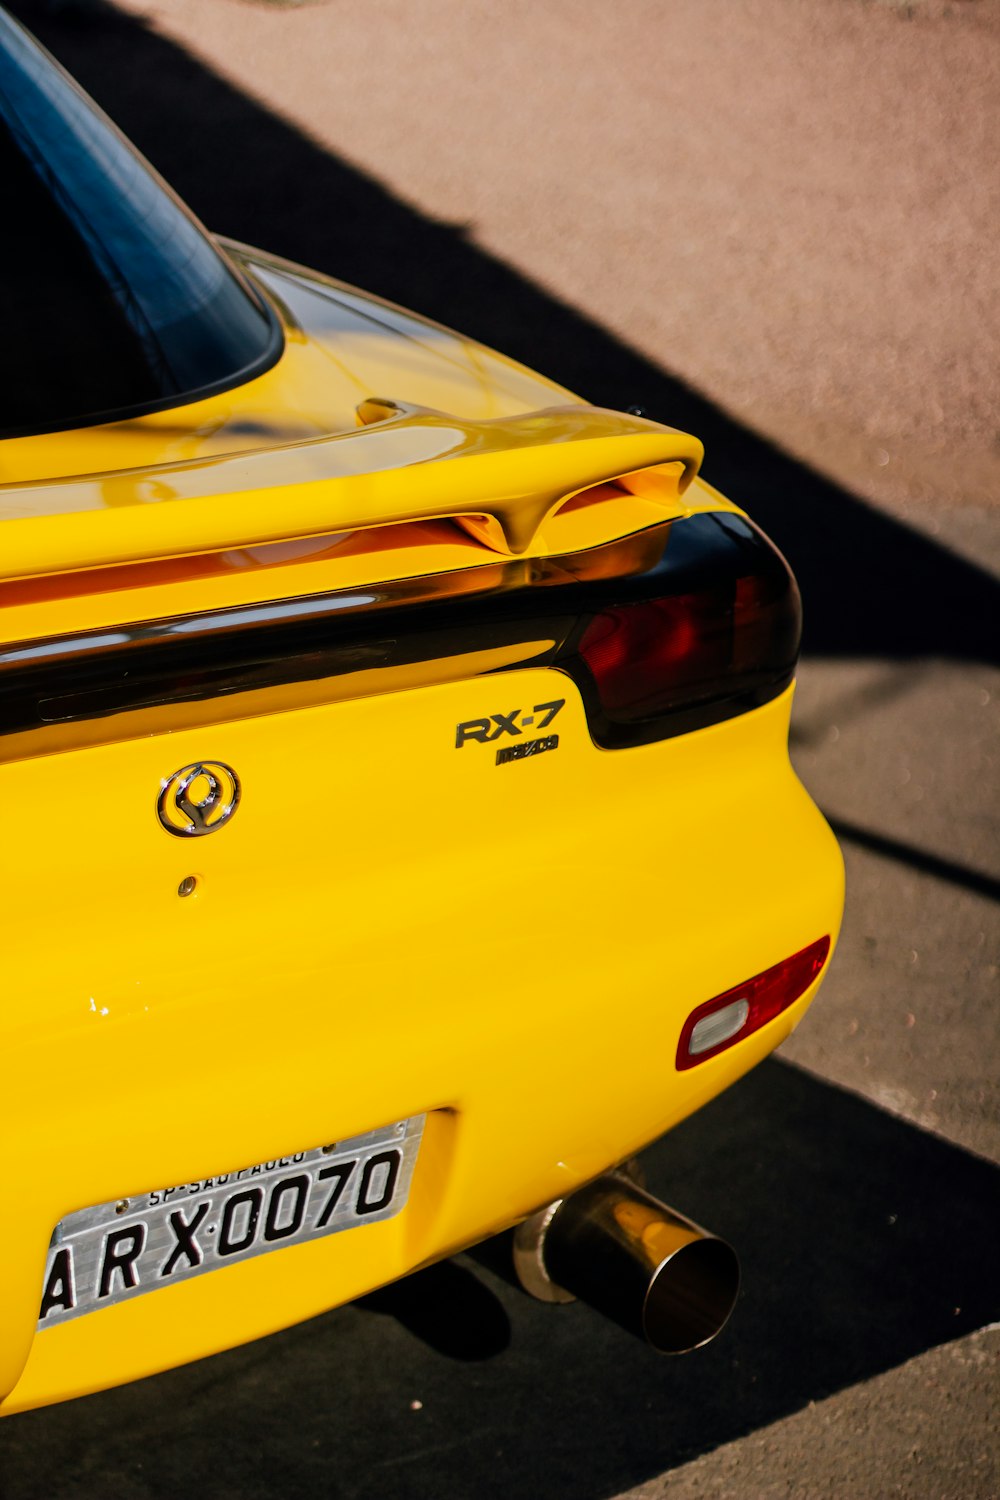 a close up of the rear end of a yellow sports car